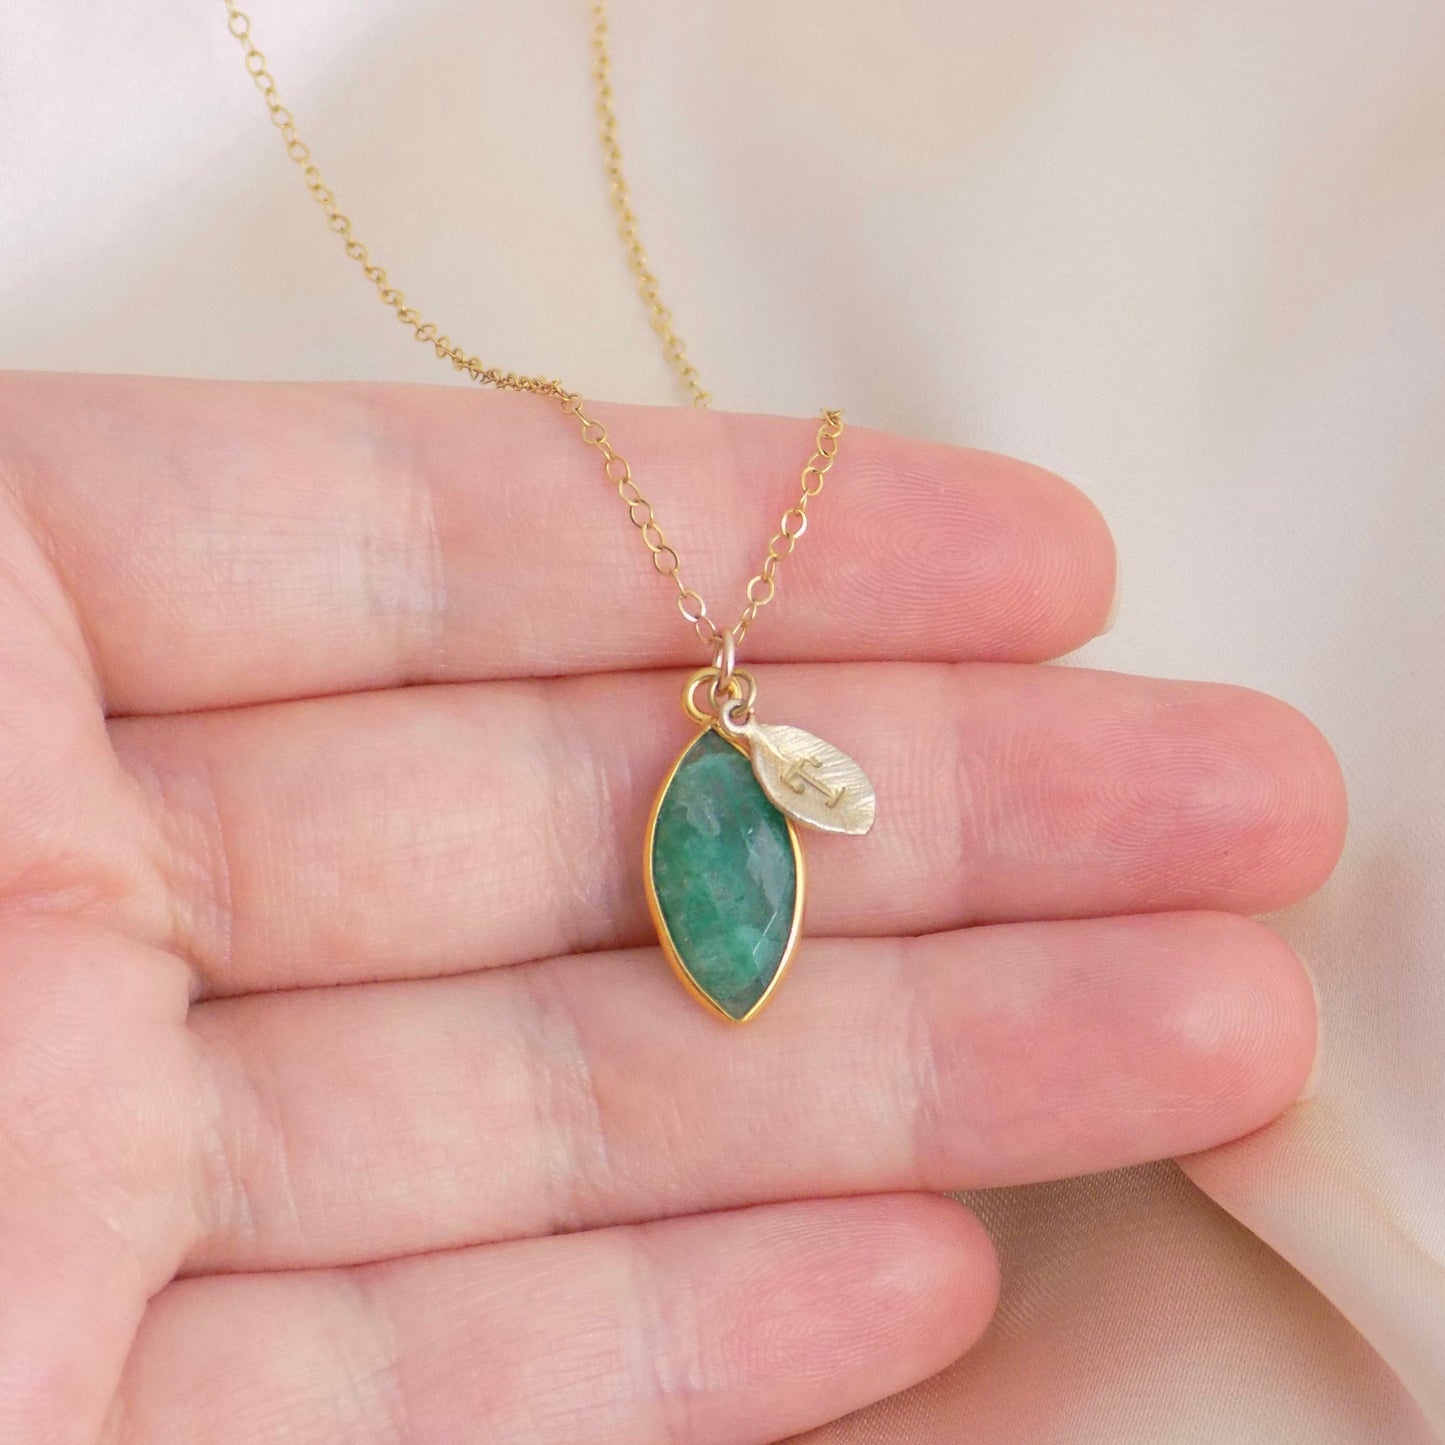 Raw Emerald Necklace Personalized Gold Fill, May Birthstone Necklace, Genuine Emerald Marquise, May Birthday Gift For Wife, M6-88